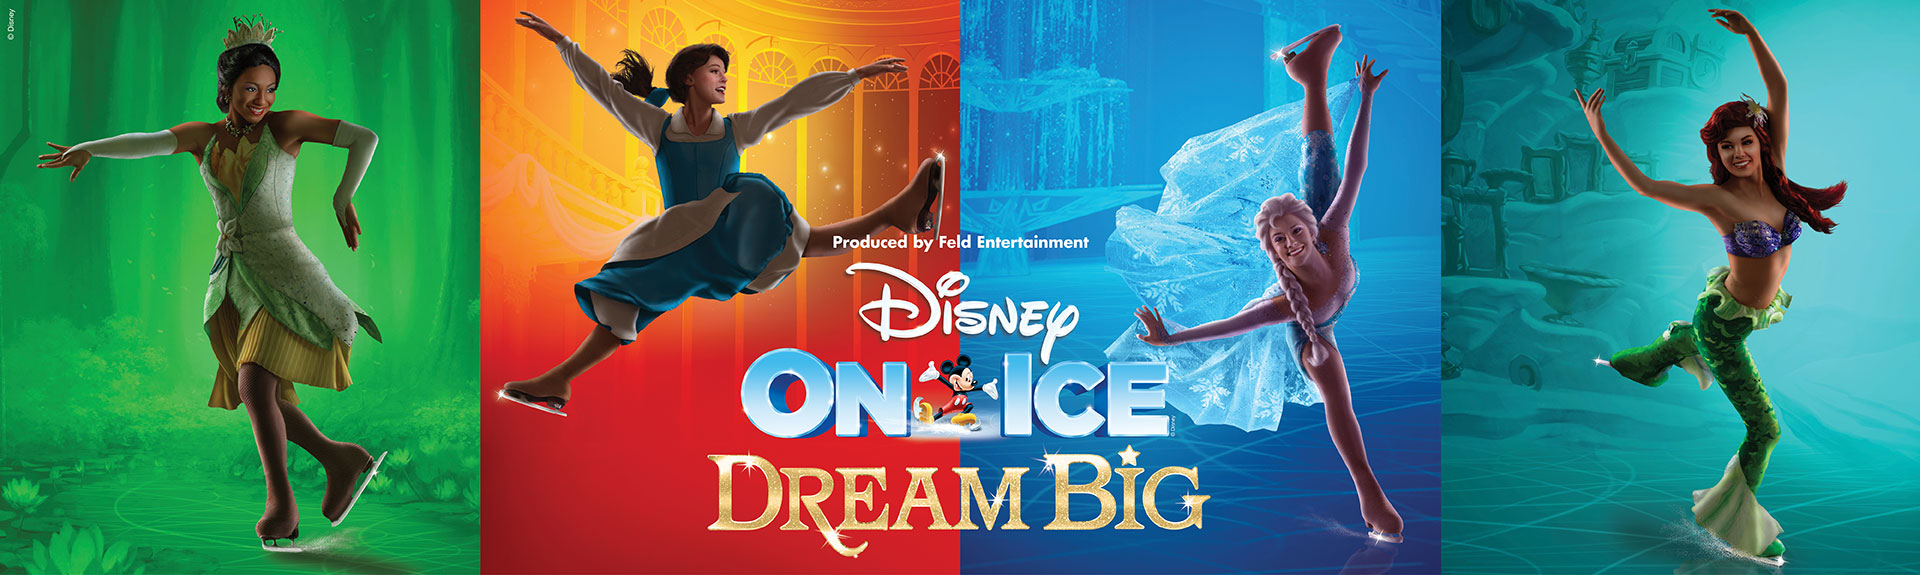 WIN Tickets to see Disney on Ice – Dream Big Tour in Johannesburg, Durban & Cape Town!